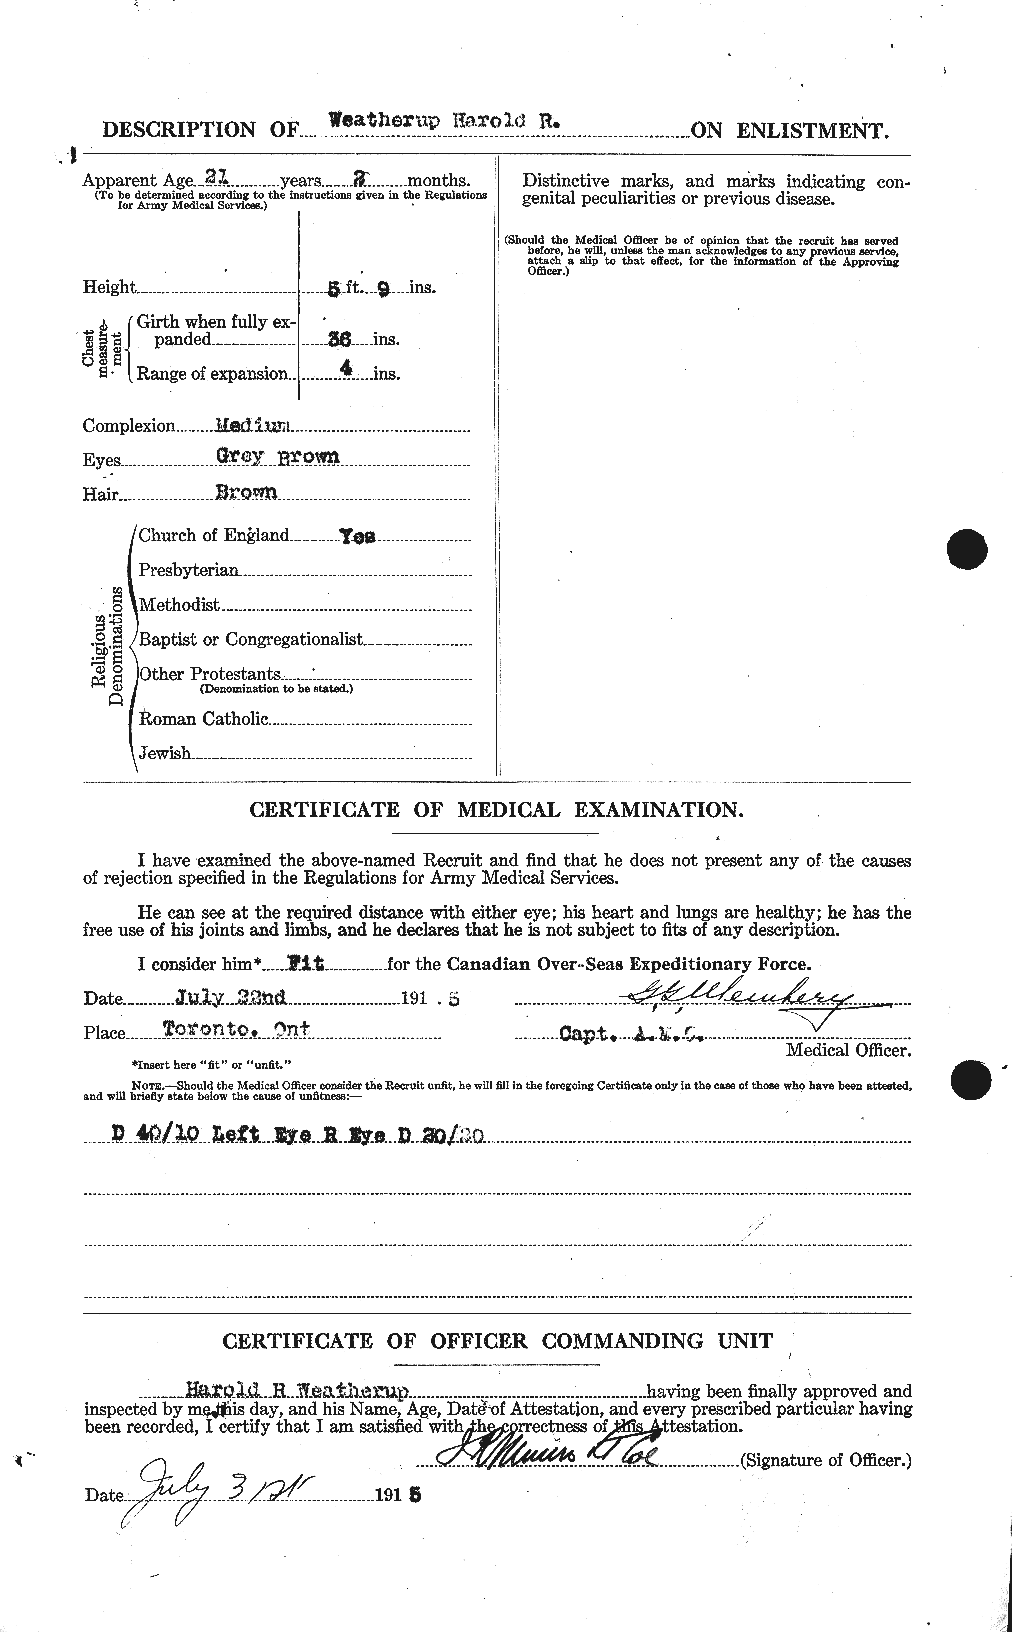 Personnel Records of the First World War - CEF 664287b